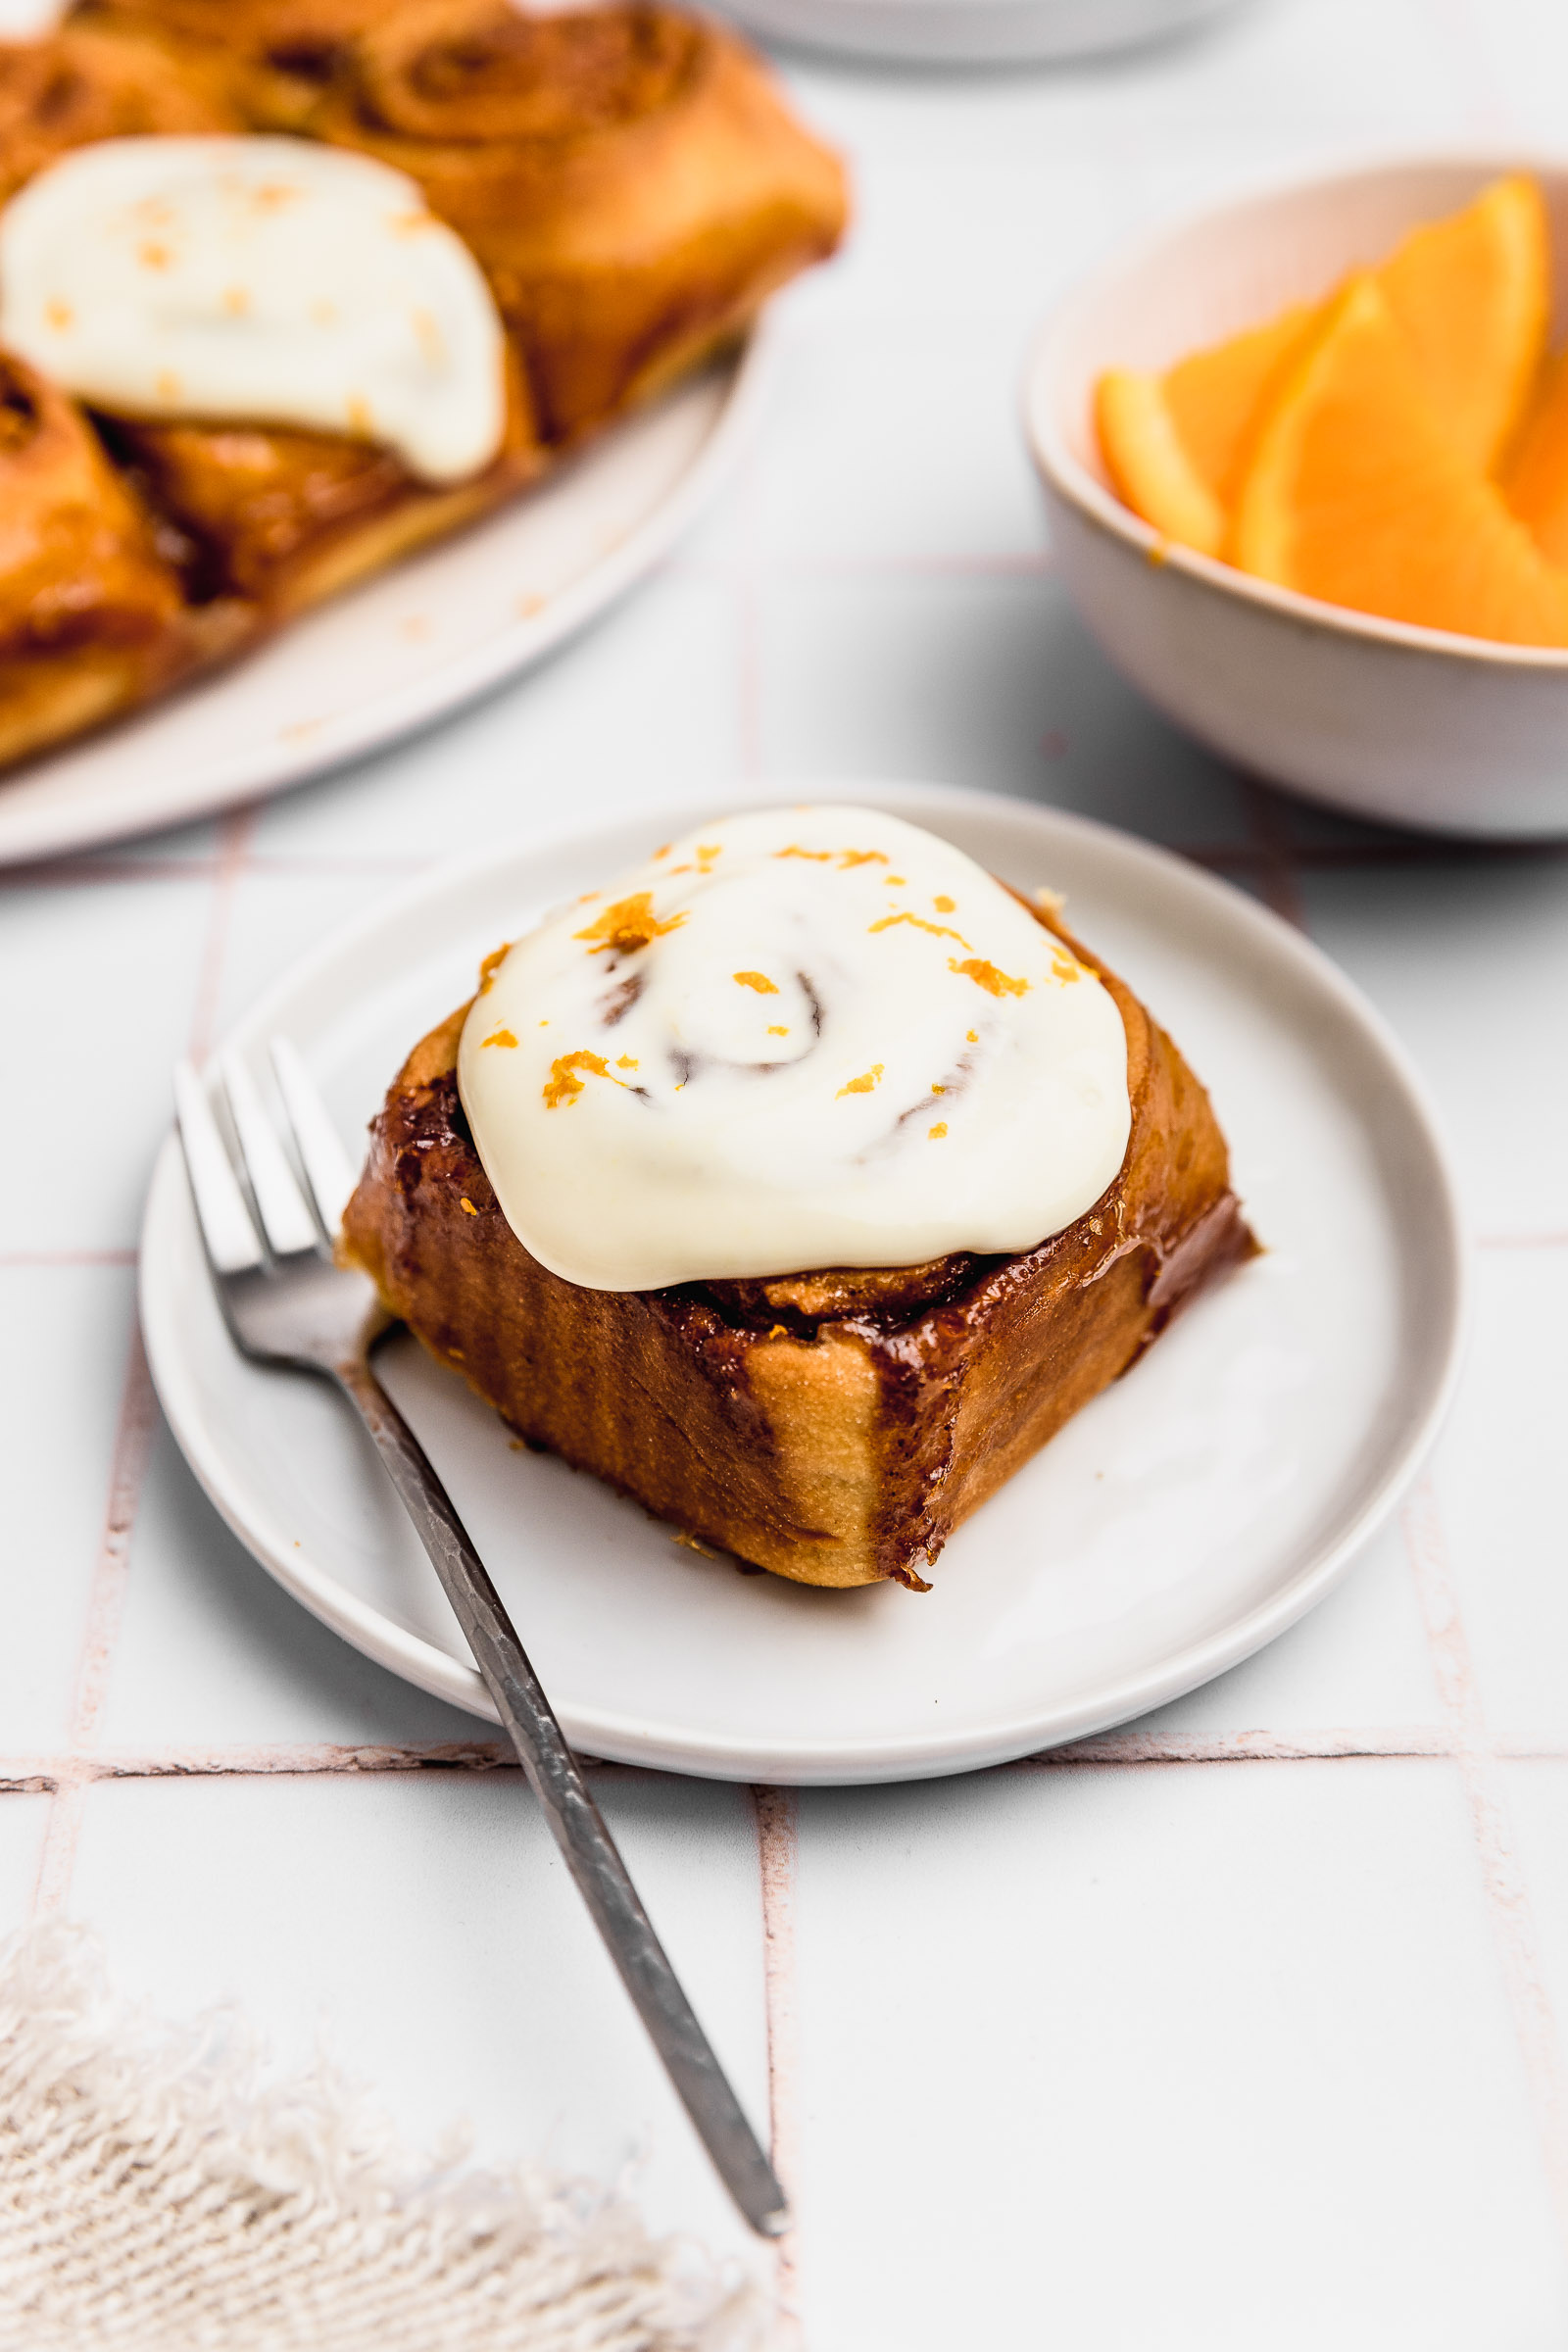 One single orange cinnamon roll with orange cream cheese frosting on top. It also has orange zest to finish.